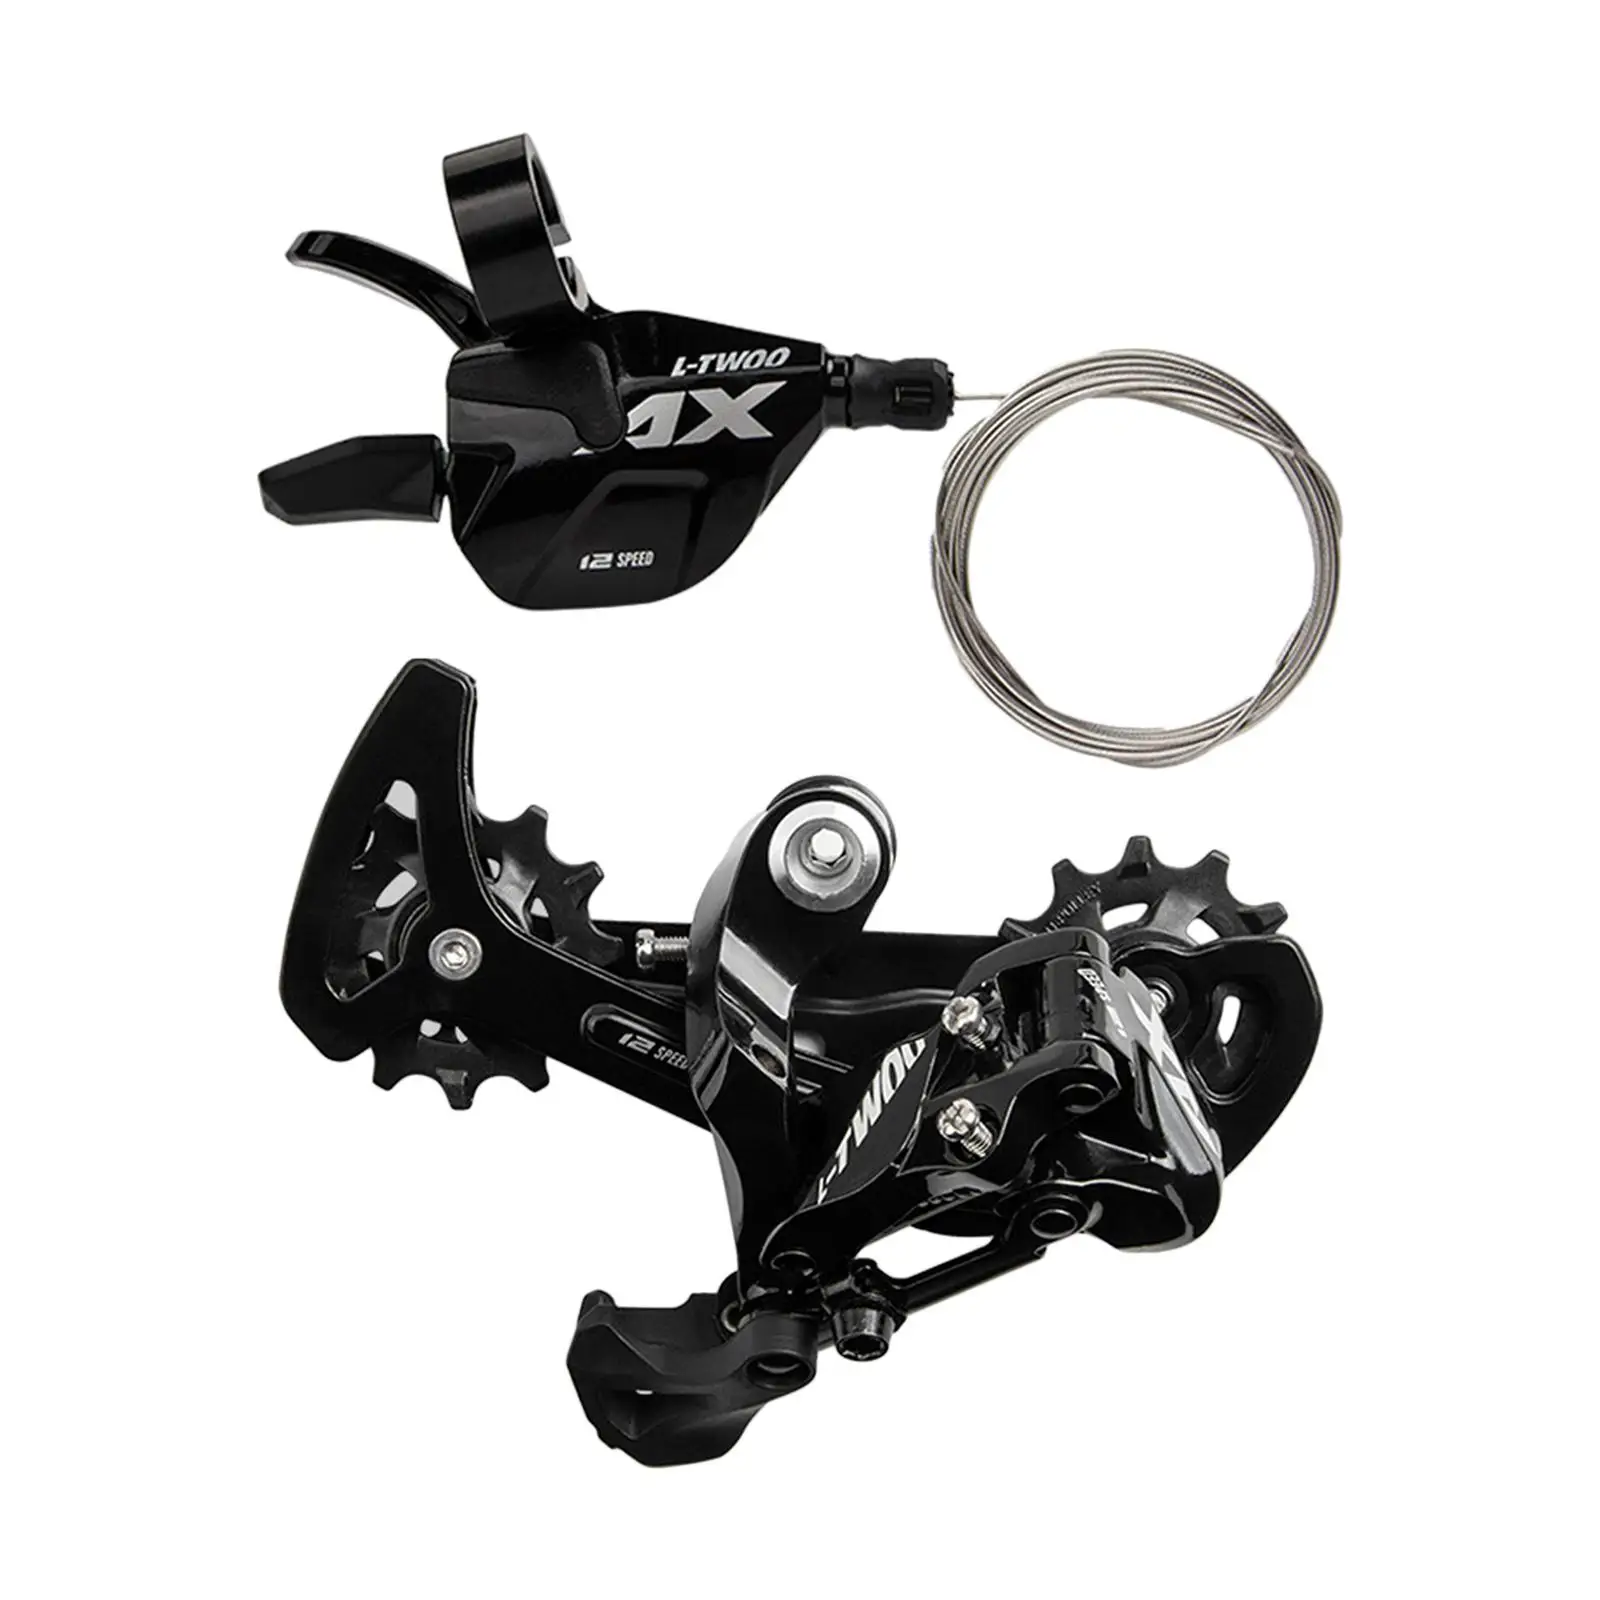 Mountain Bike Bicycle Rear Derailleur Long Cage 12 Speed Direct Mount Aluminum Alloy + Right Shifter Lever Transmission Kit